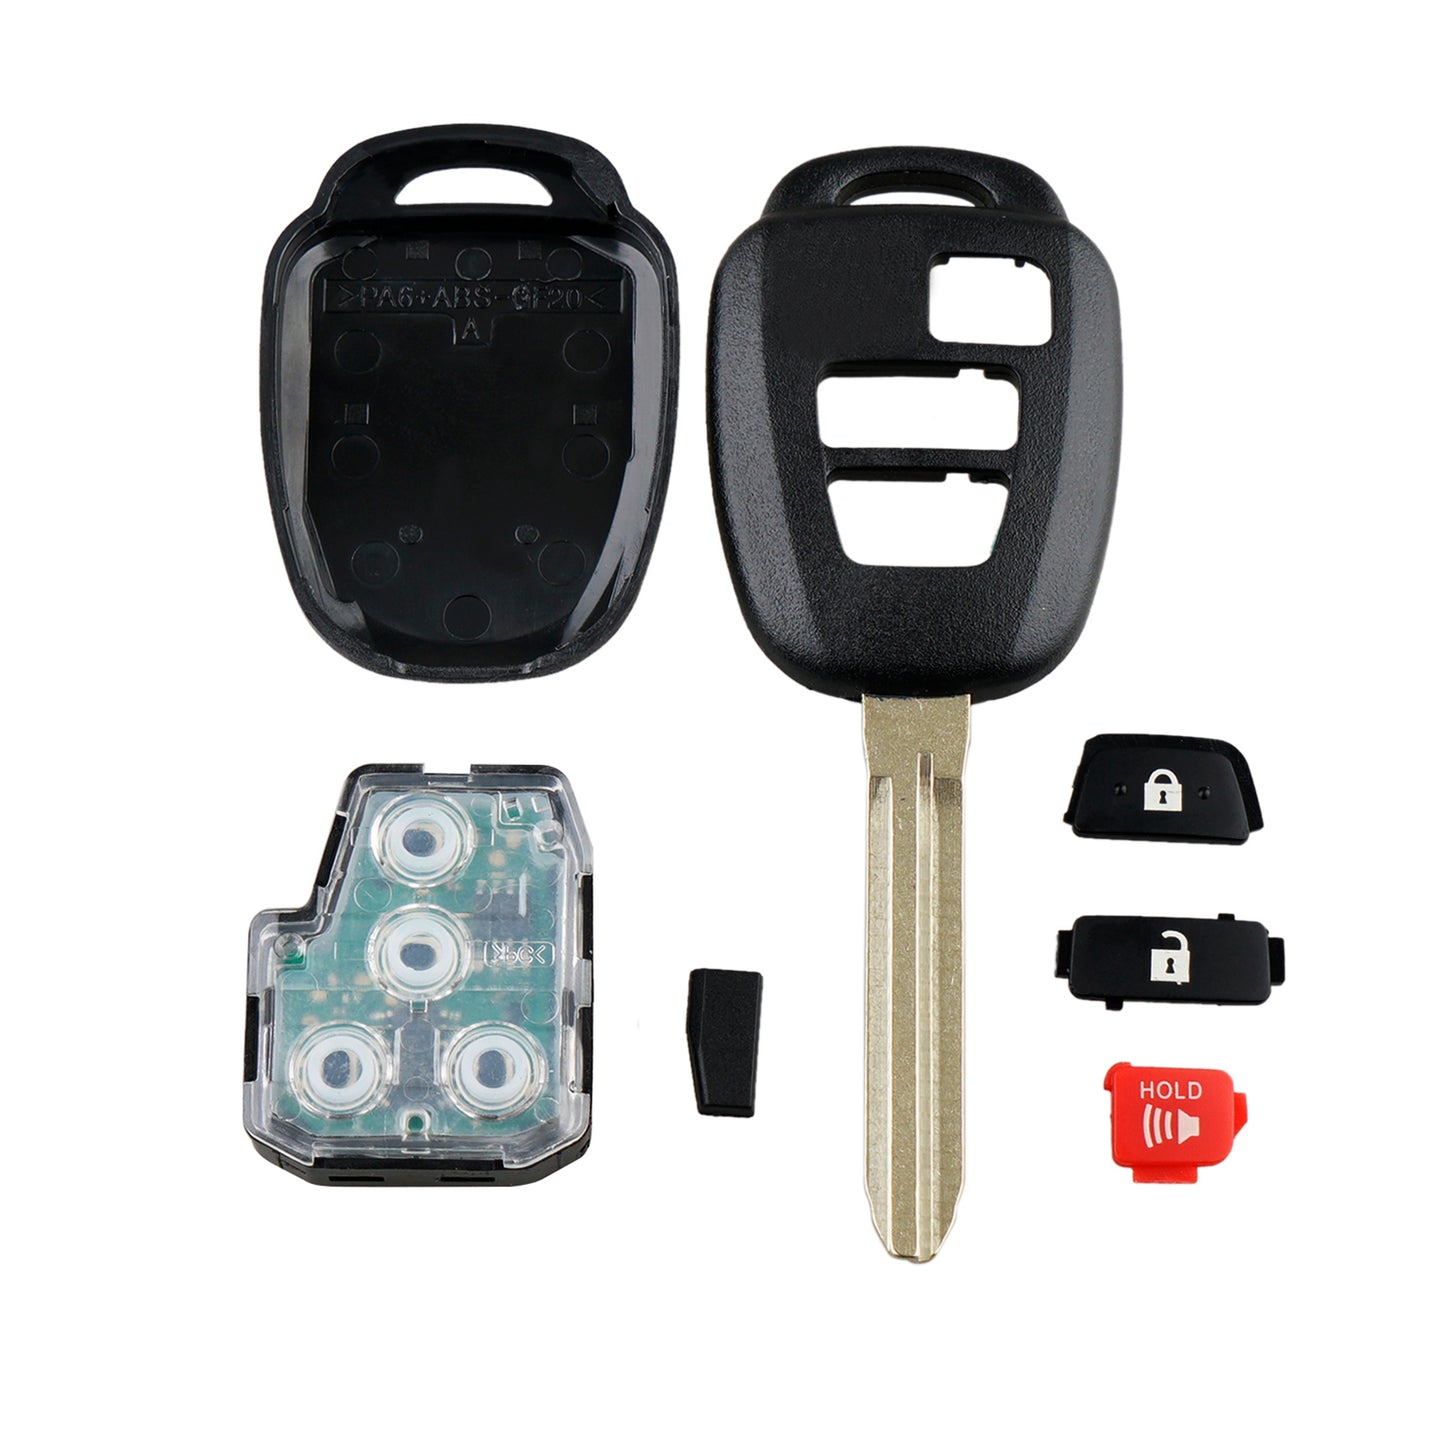 3 Buttons 314MHz Keyless Entry Fob Remote Car Key For 2013-2021 Toyota RAV4 (US built vehicles only) Highlander Tacoma Tundra Sequoia FCC ID:  GQ4-52T GQ452T SKU : J247